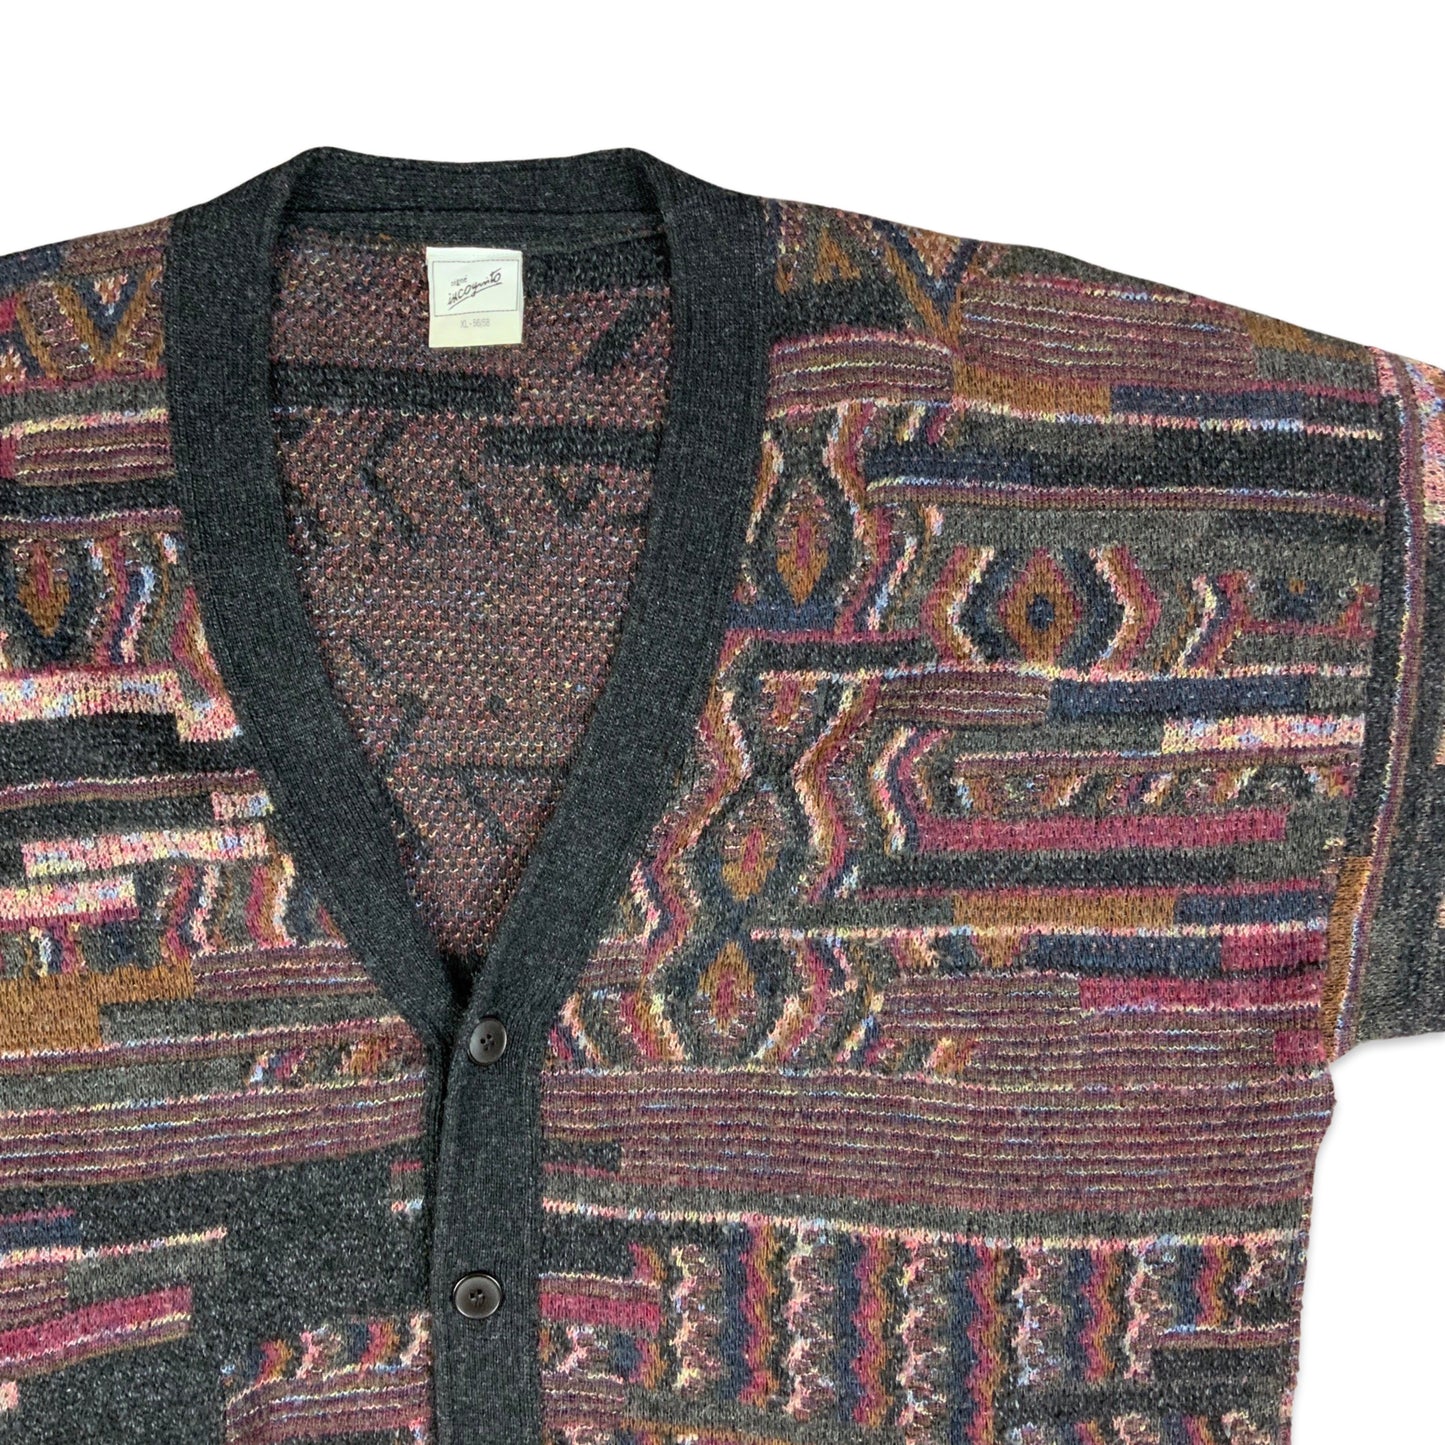 Vintage 80s Black & Purple Abstract Pattern Knitted Cardigan XL XXL